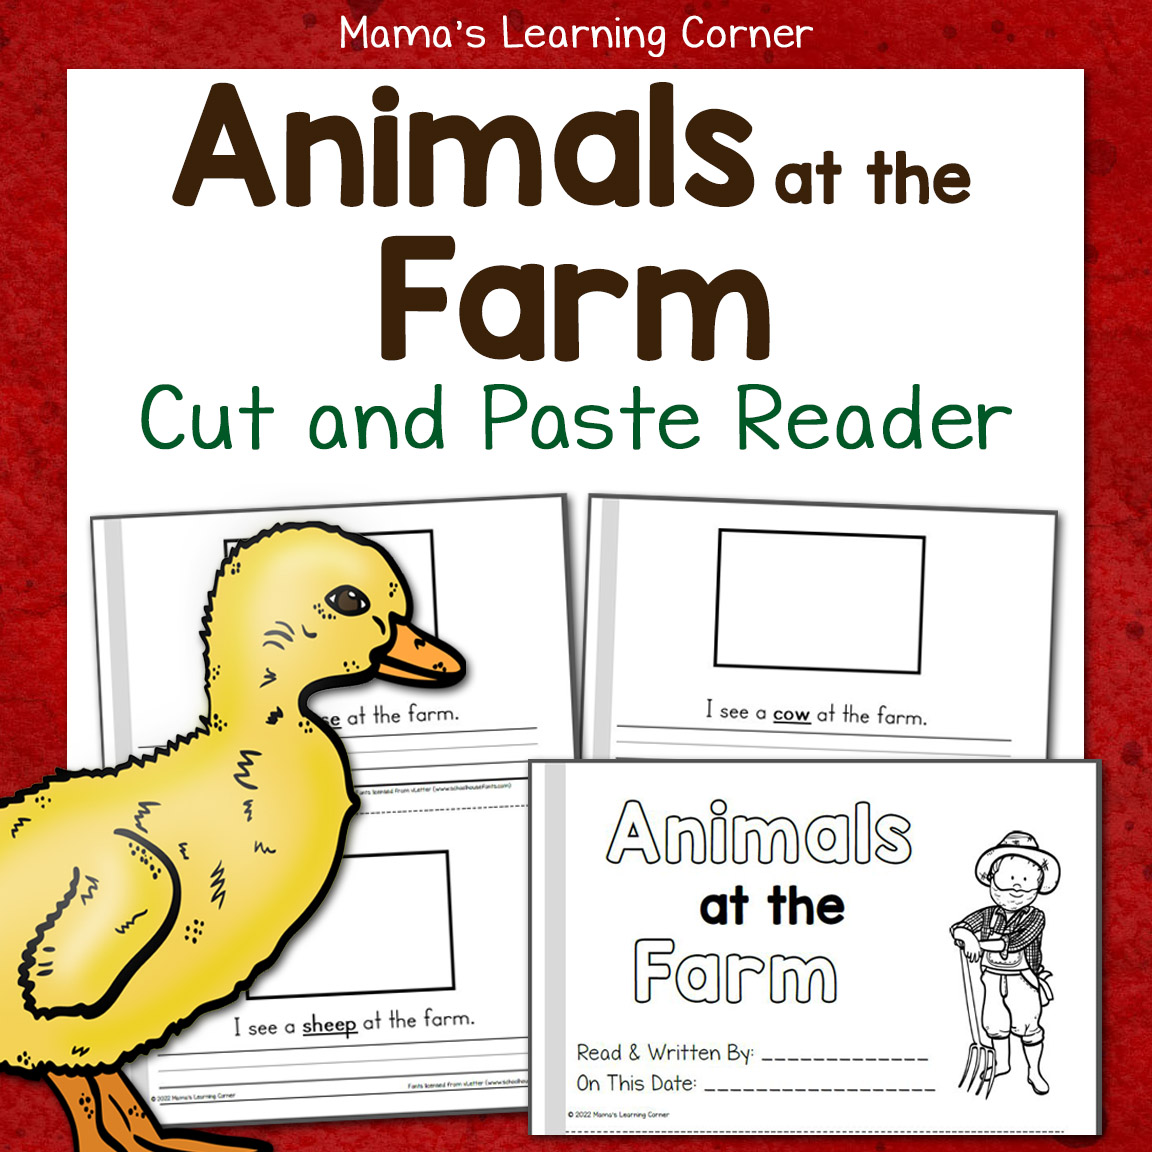 Animals at the Farm Cut and Paste Reader